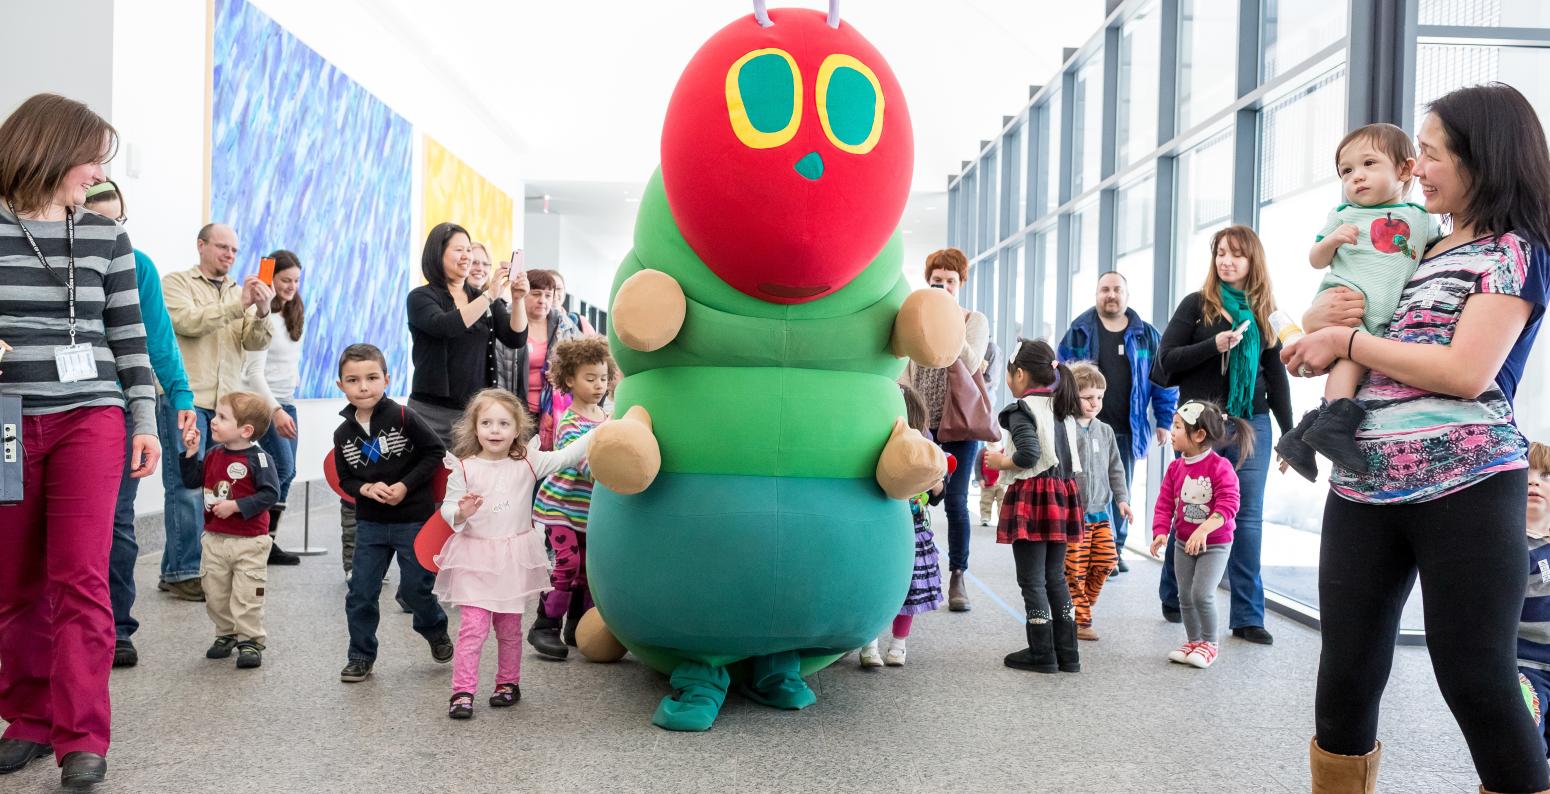 Visitors in the museum walking next to The Very Hungry Caterpillar costume.